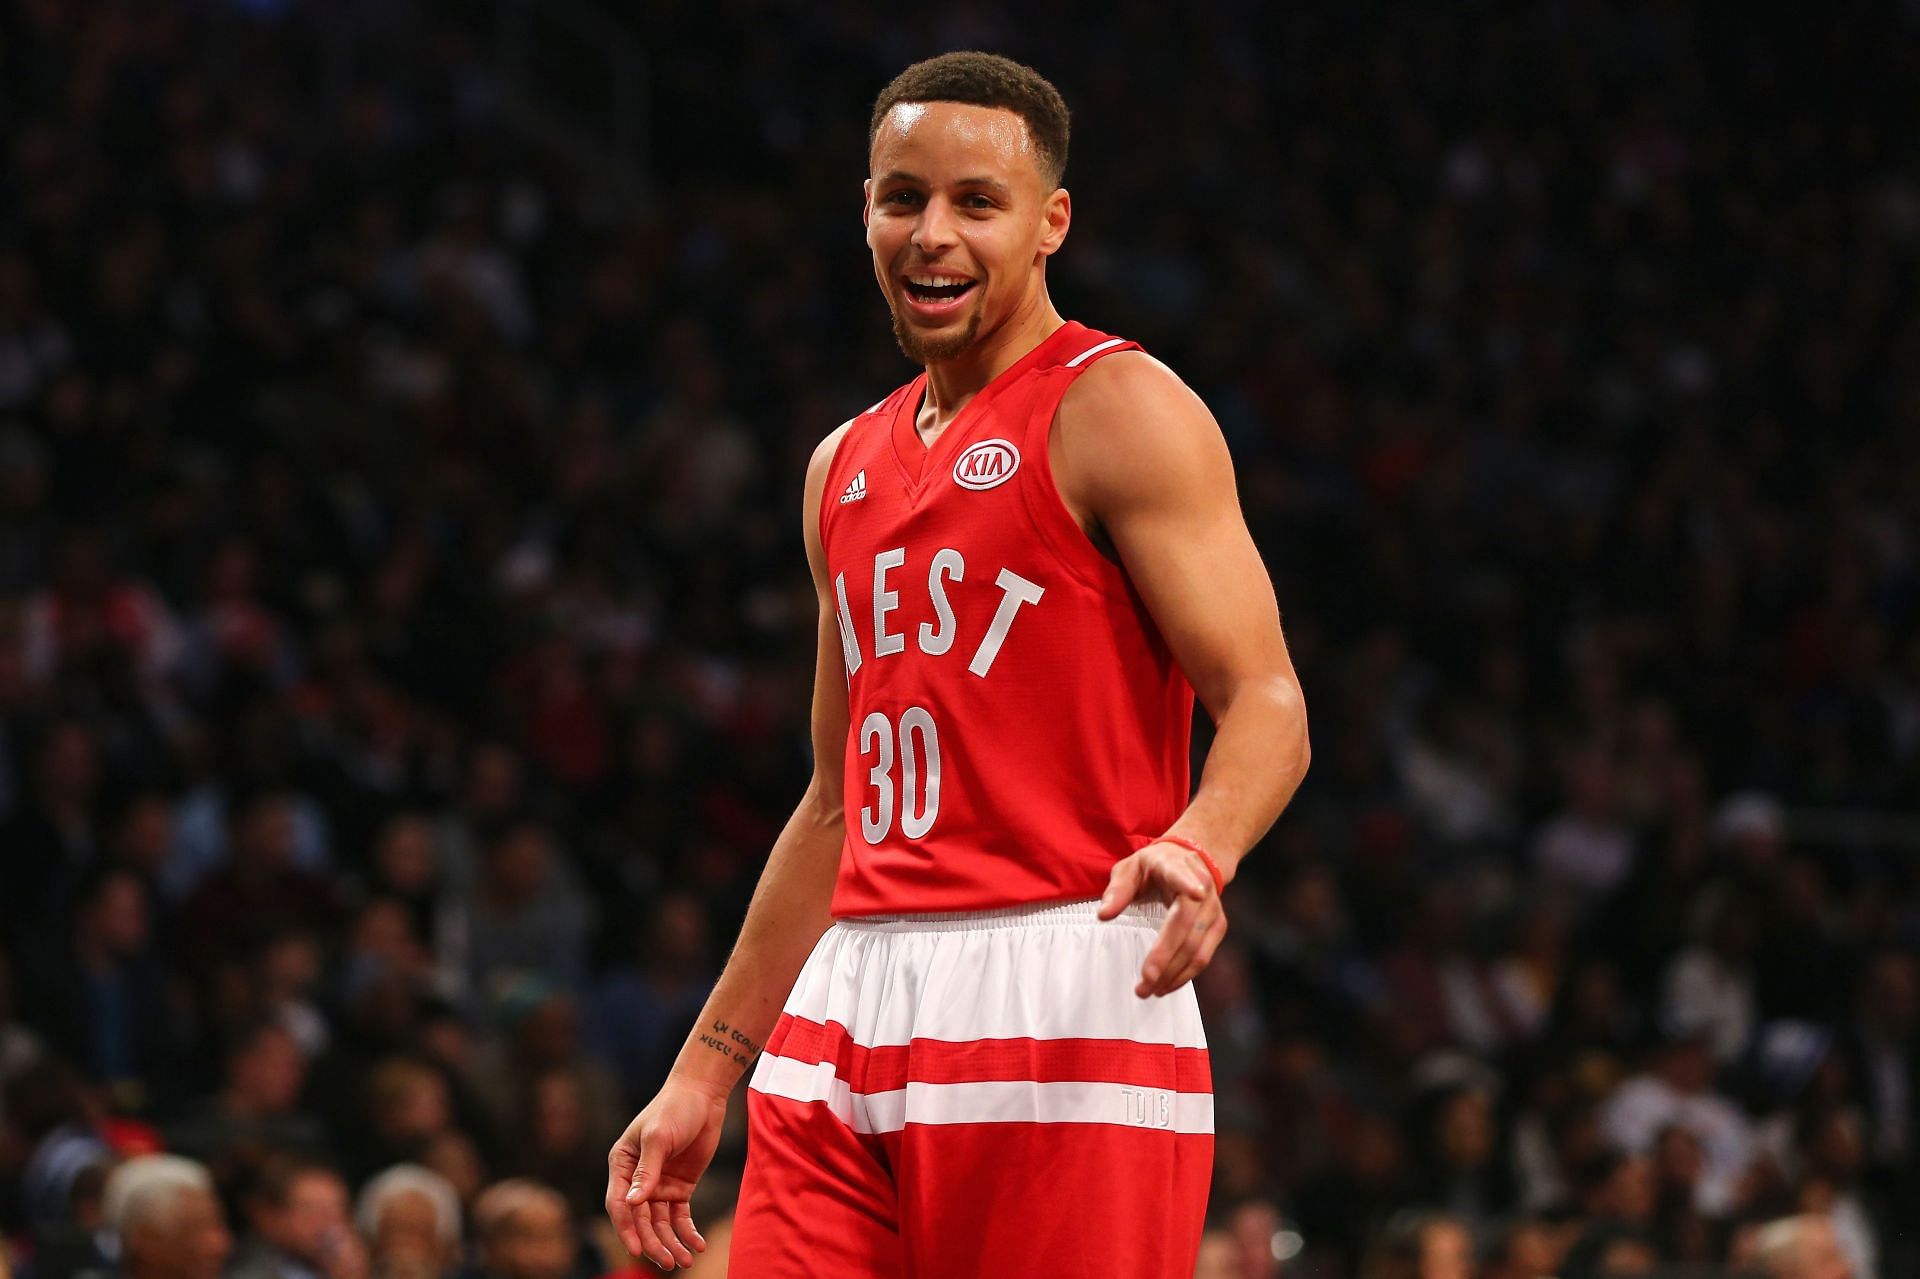 Steph Curry during the 2016 NBA All-Star Game